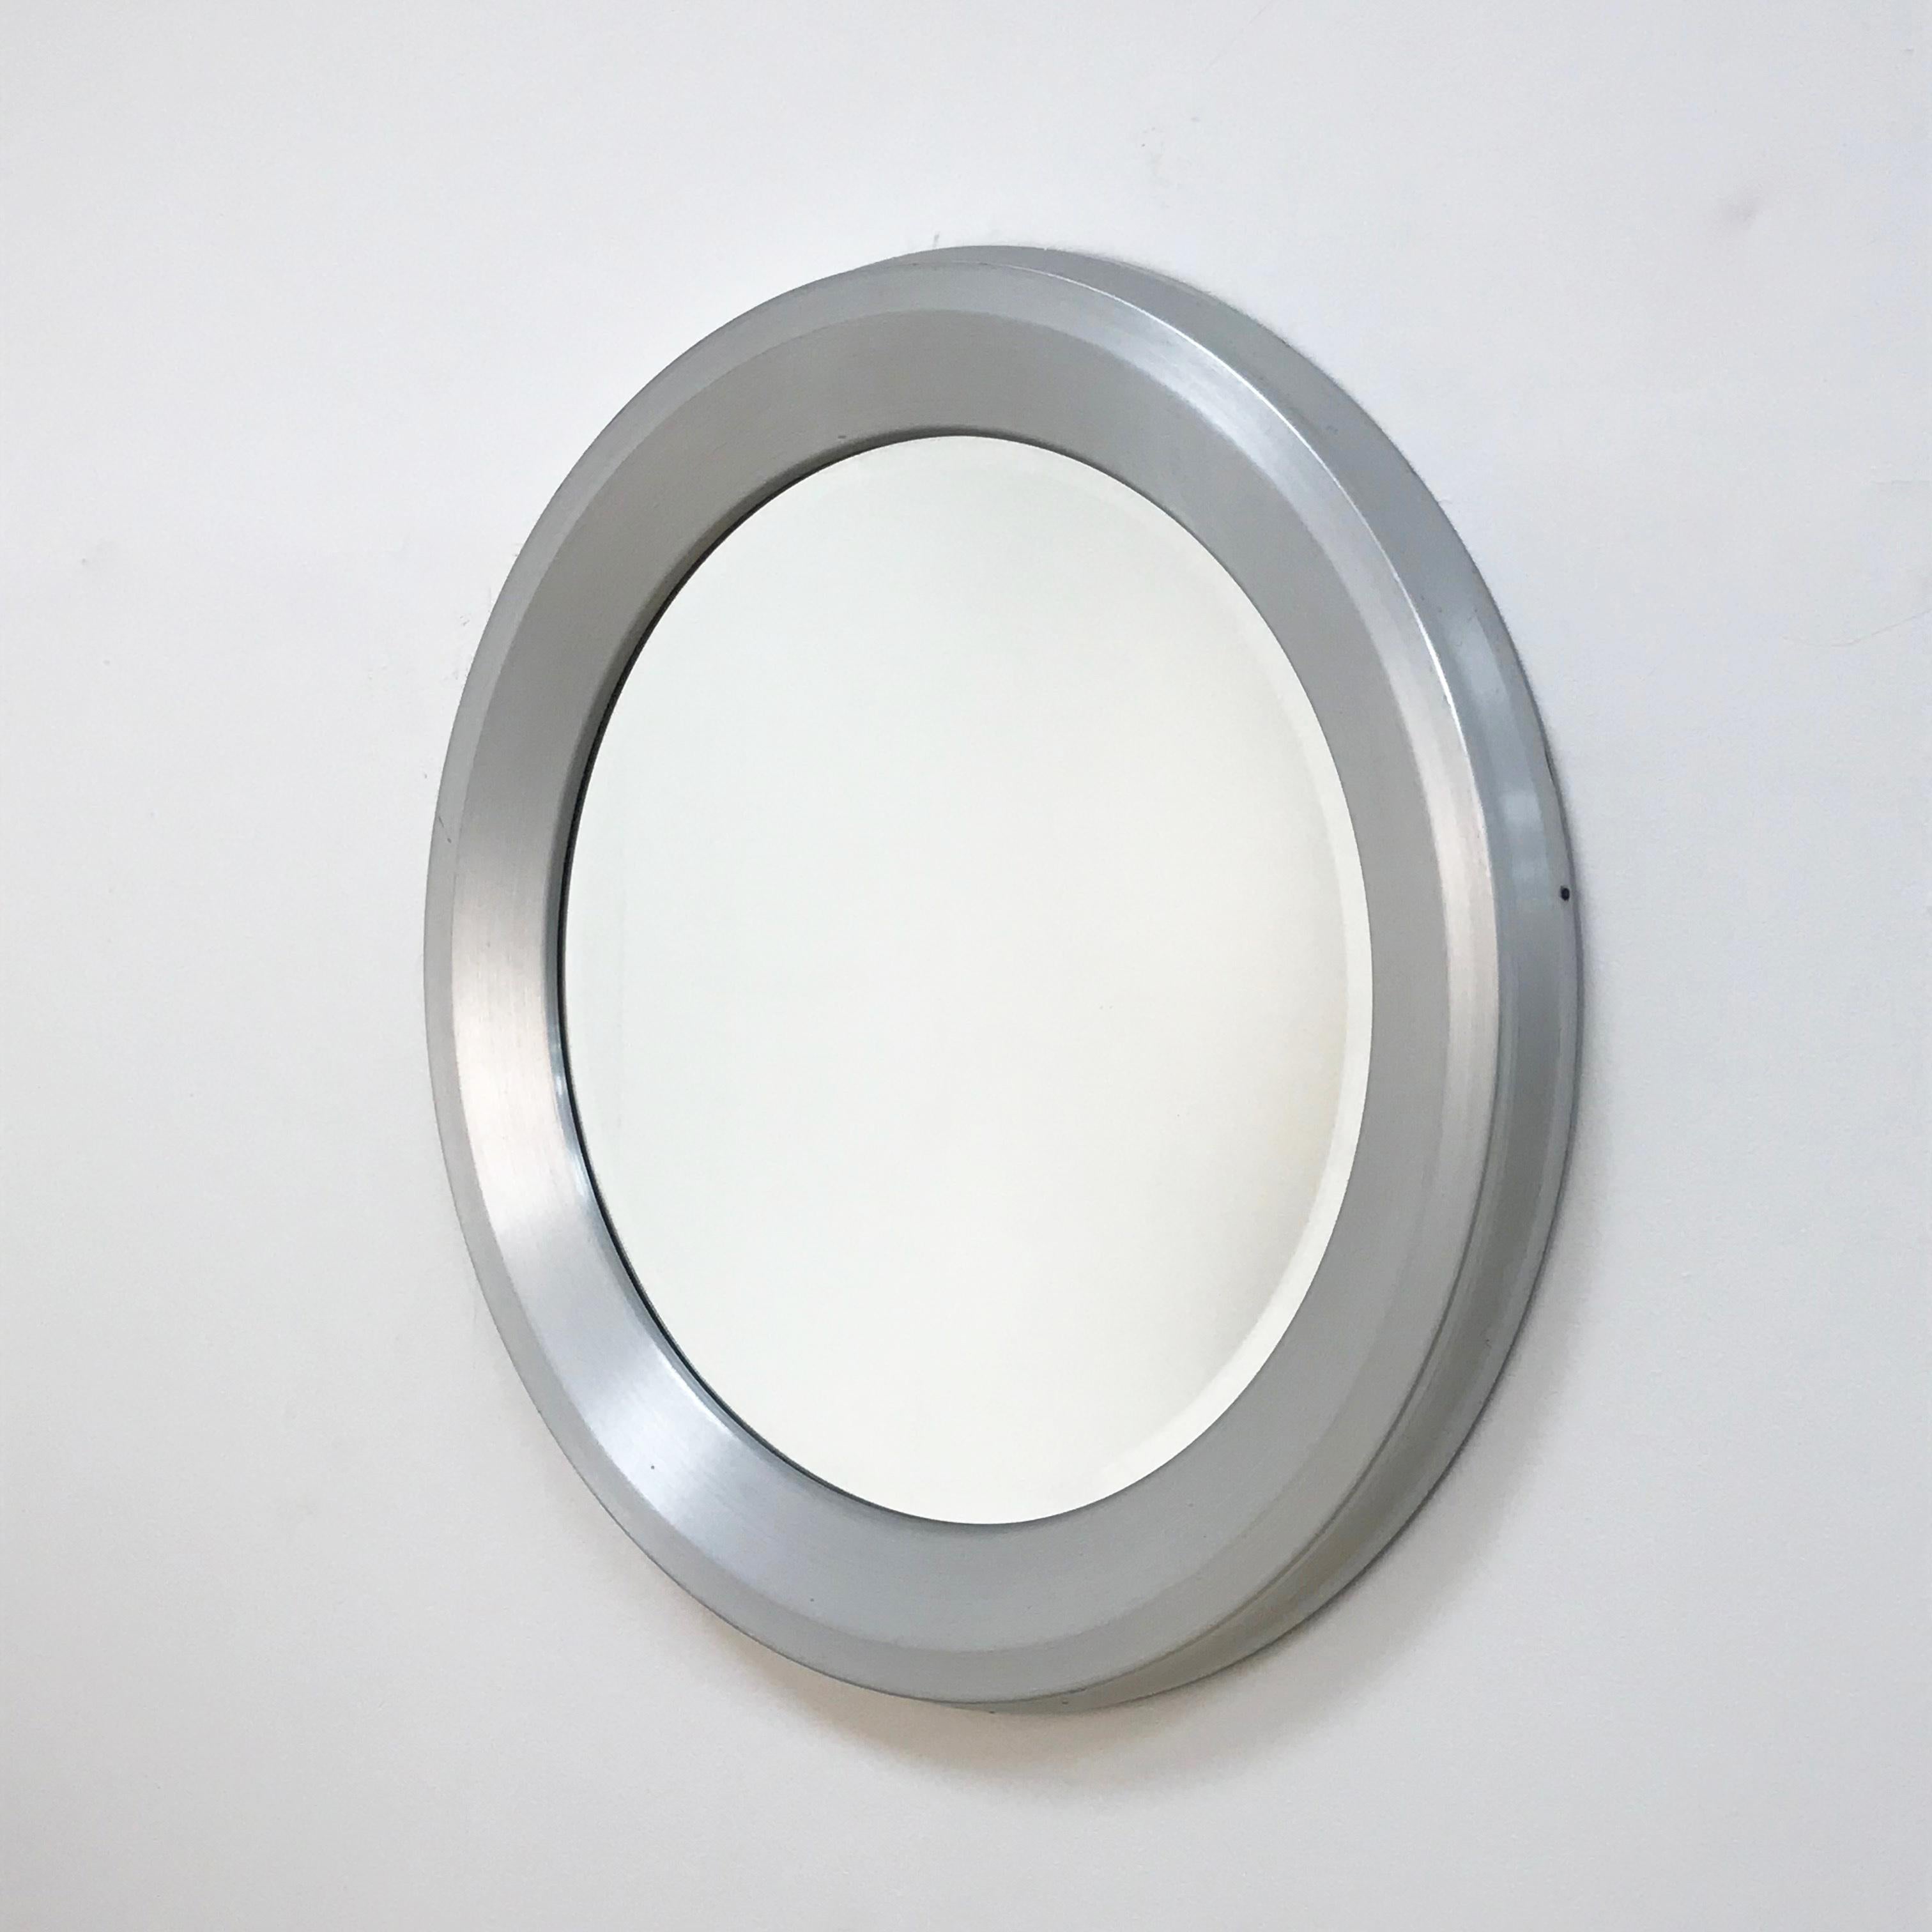 Attributable to Sergio Mazza for Artemide
Italian modernist aluminum mirror.
The original mirror in the centre is in excellent condition and the frame has a concave centre that creates depth and texture. This simple mirror is quite surprising and